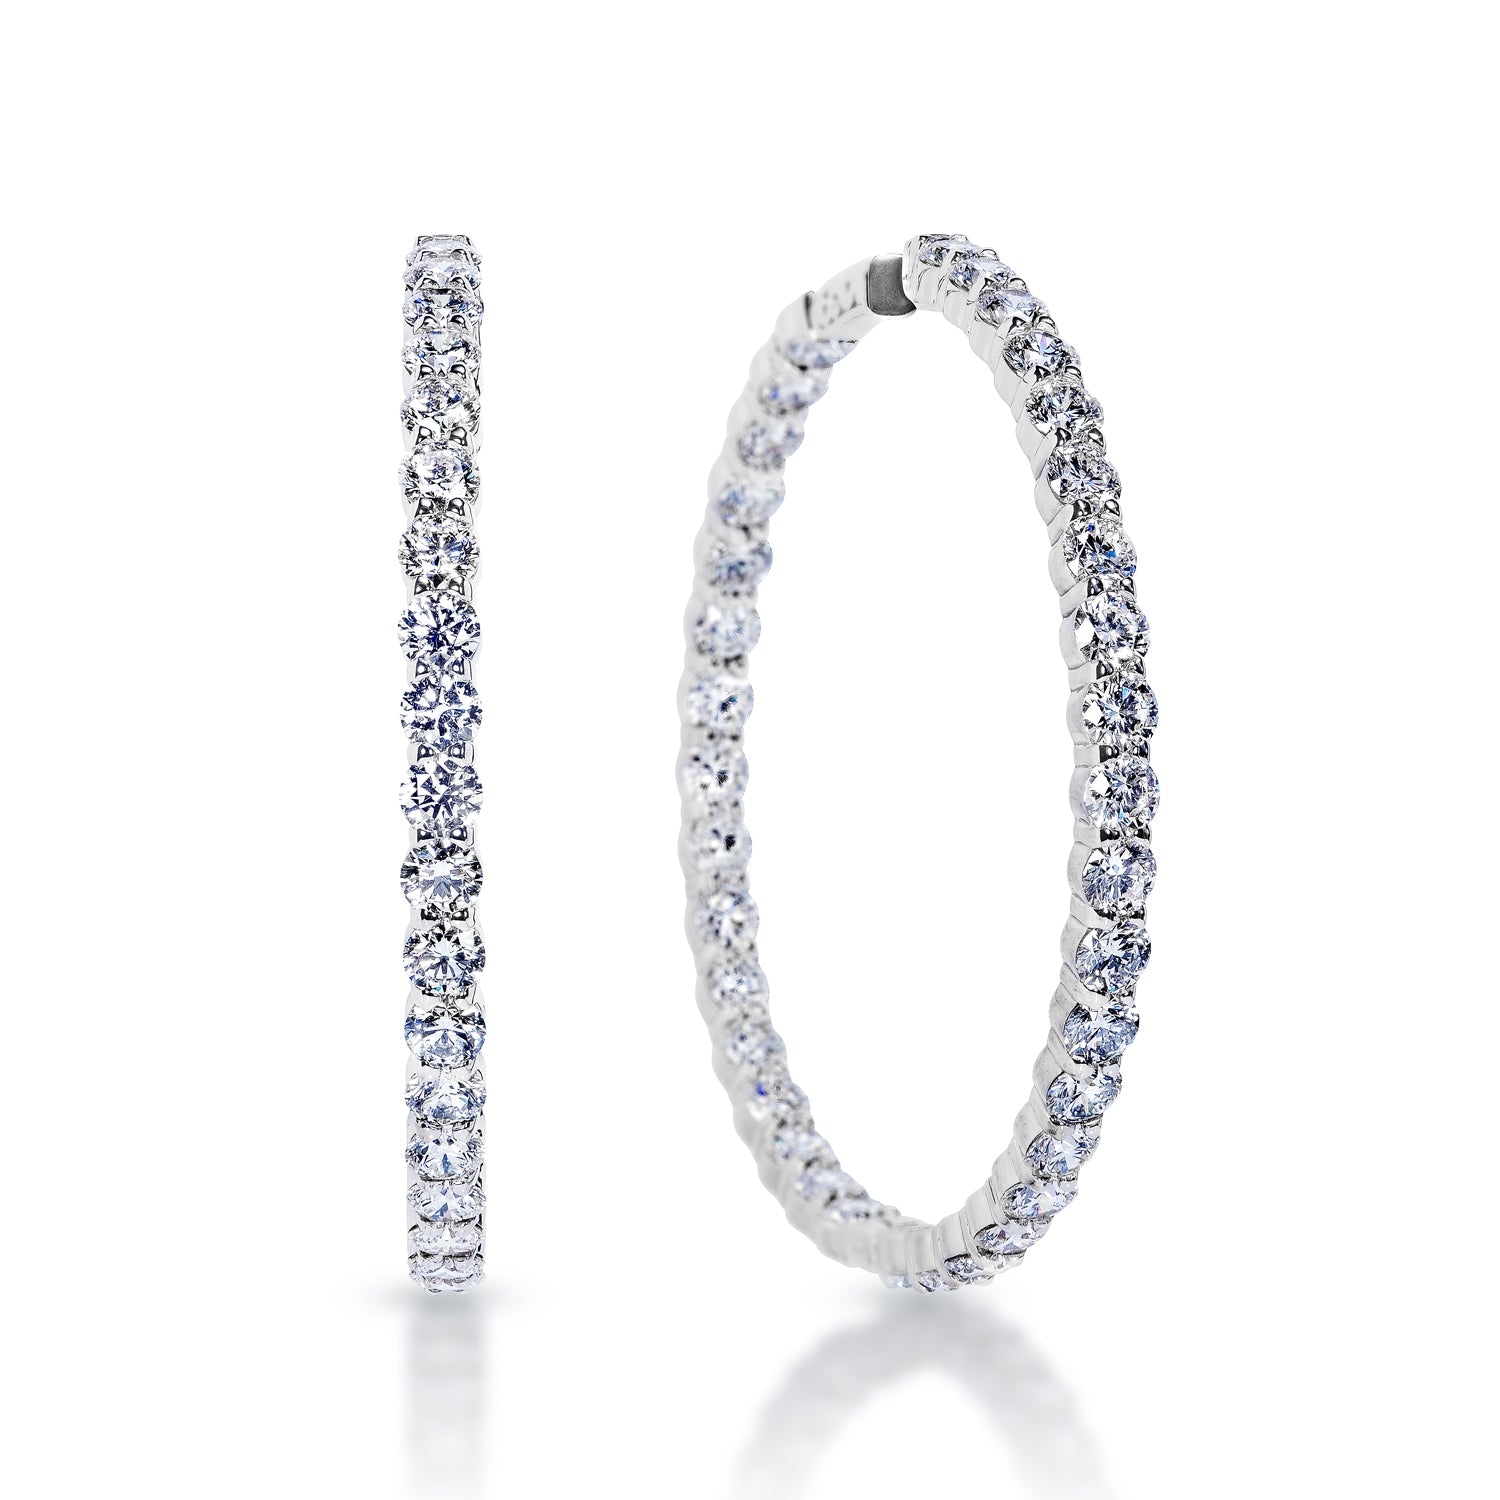 Livie 18 Carats Round Brilliant Lab Grown Diamond Hoop Earrings in 14k White Gold Front and Side View